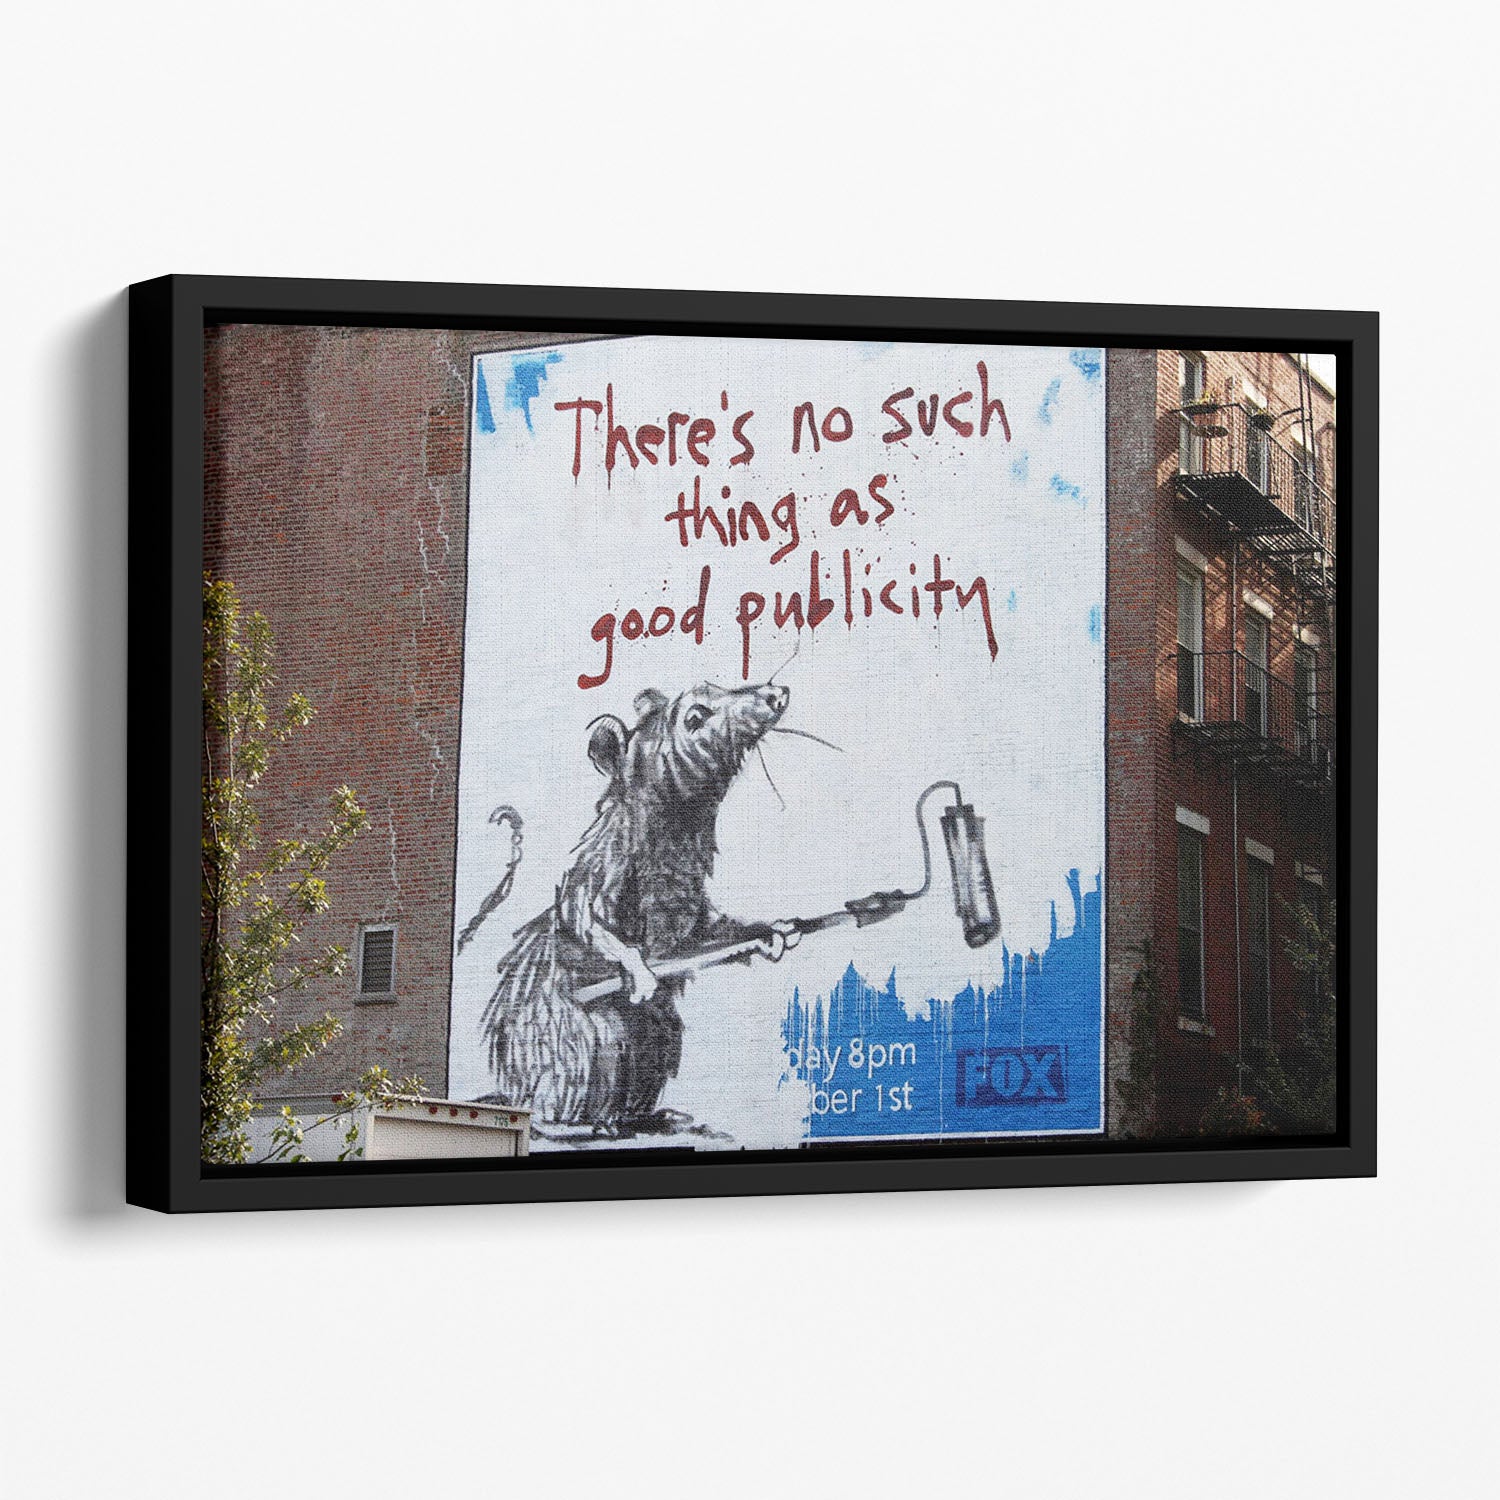 Banksy No Such Thing As Good Publicity Floating Framed Canvas